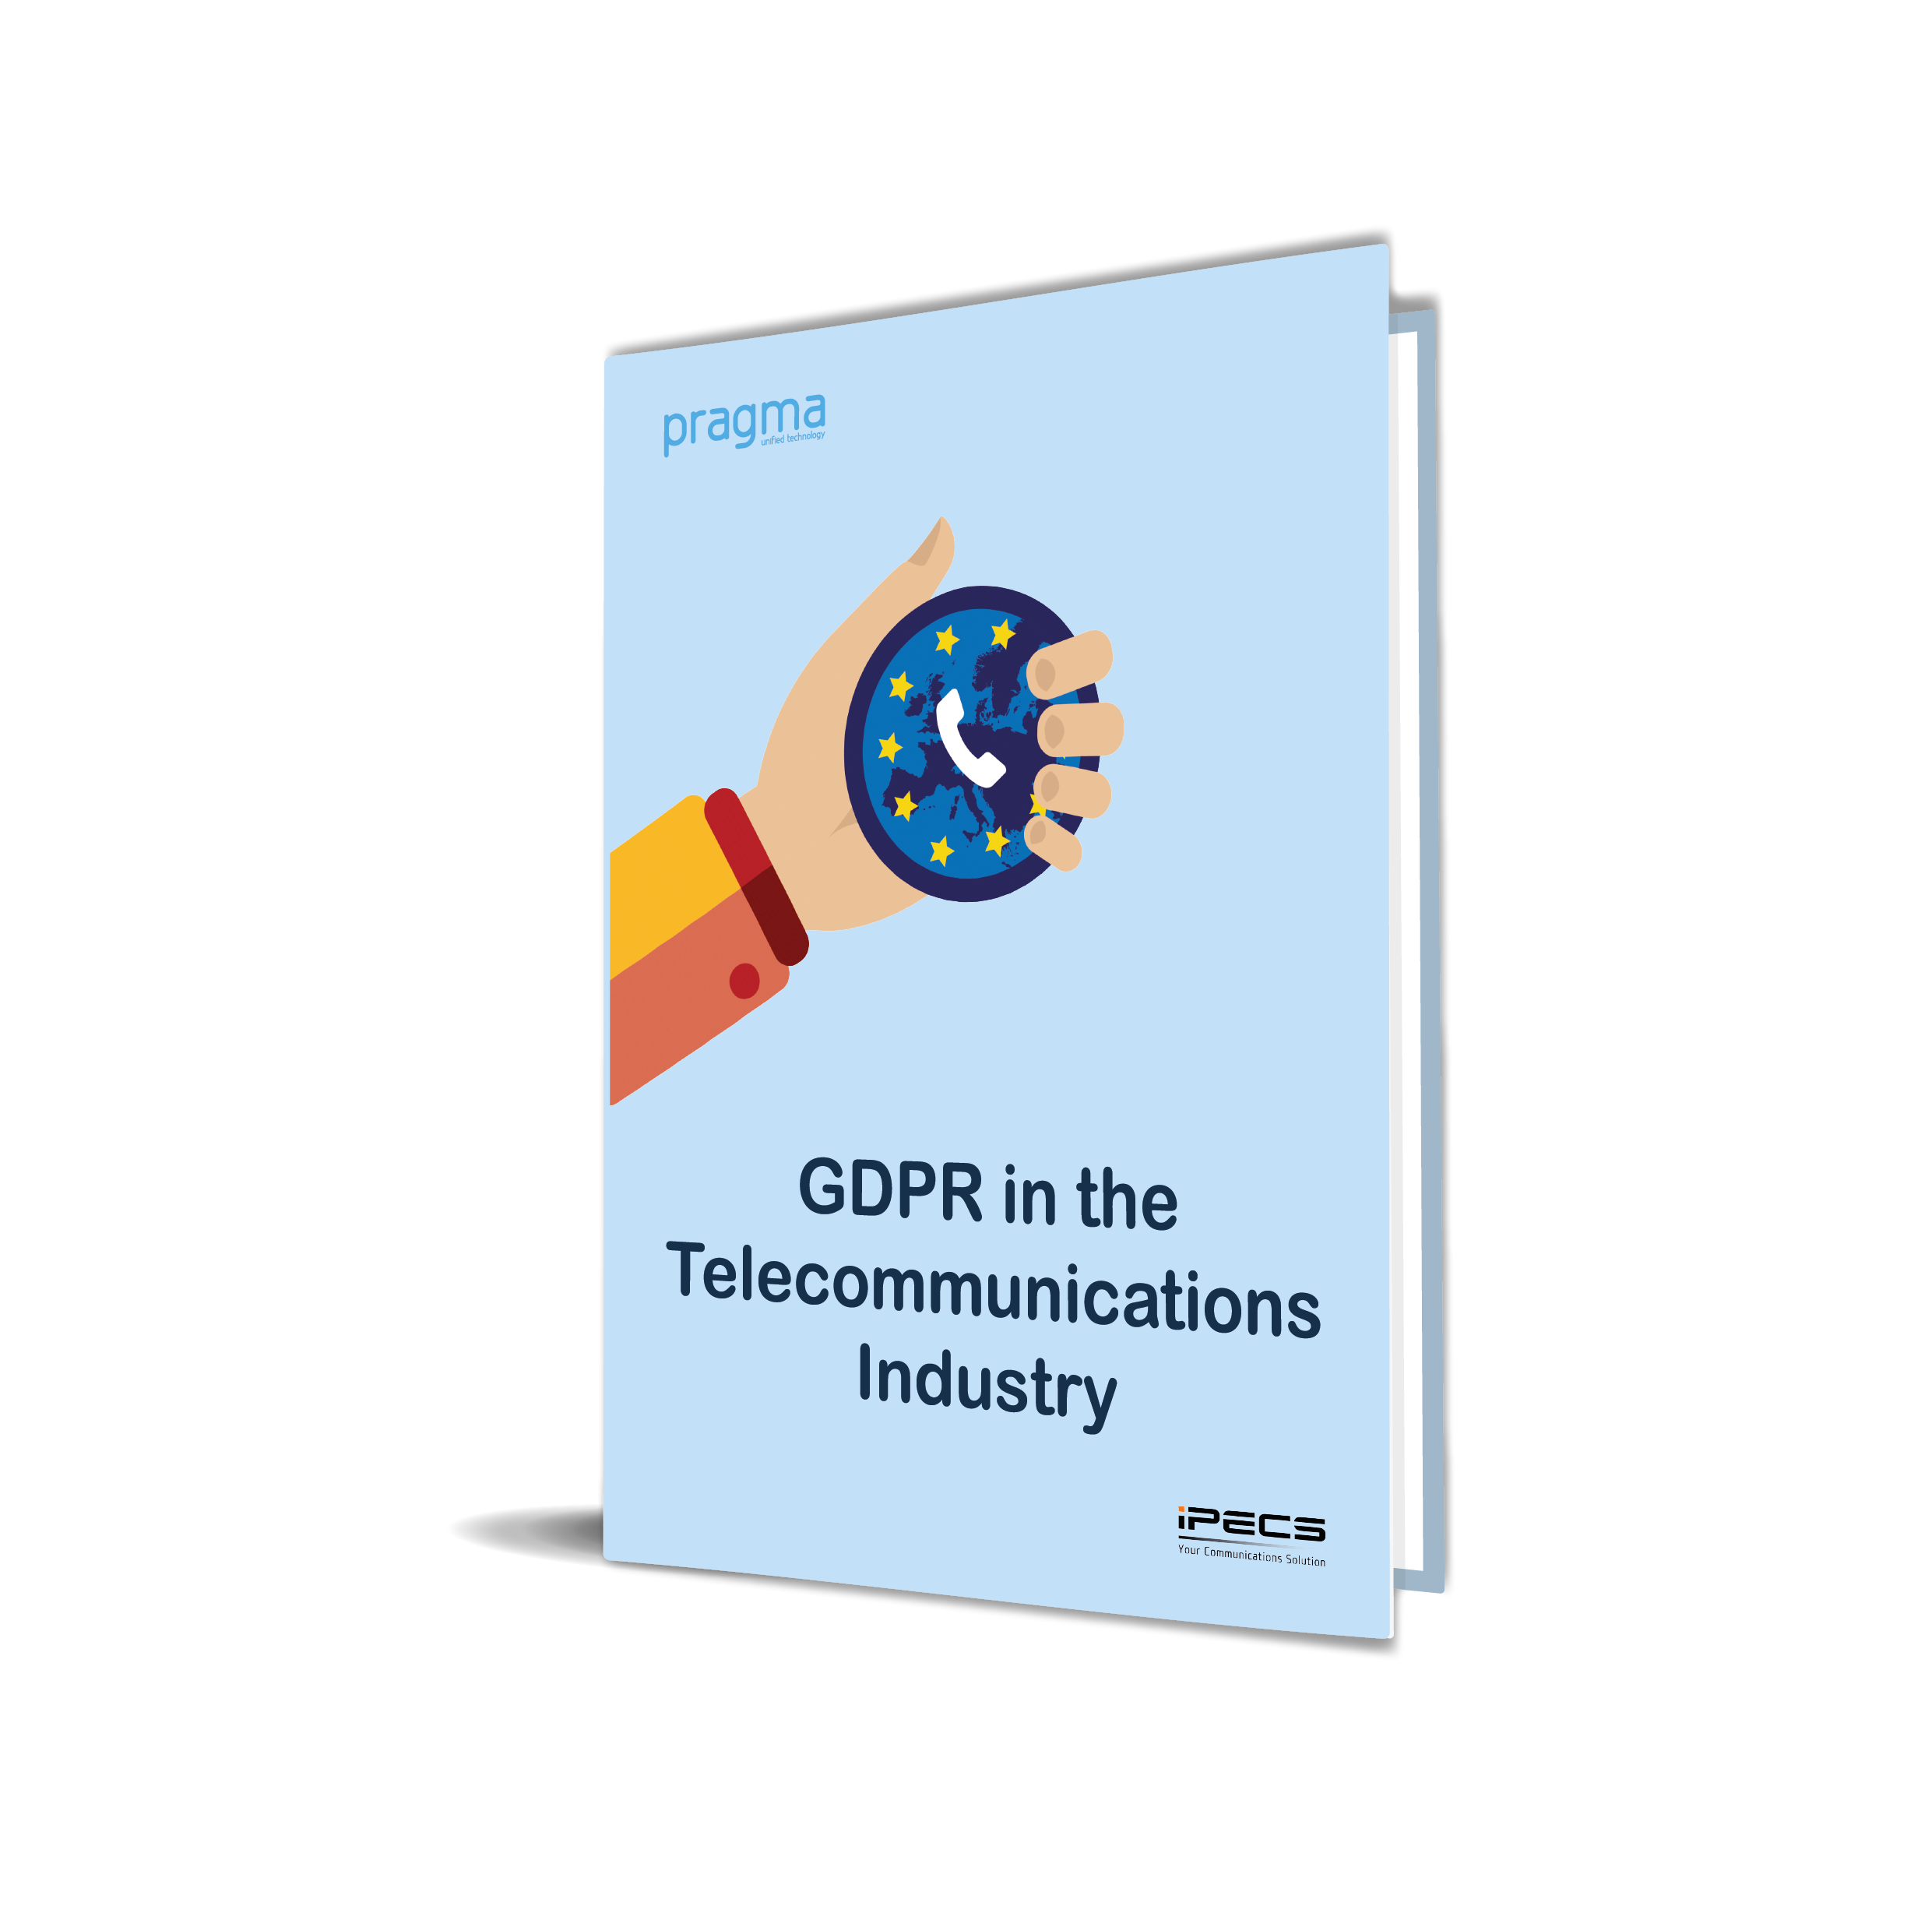 GDPR in the telecommunications industry